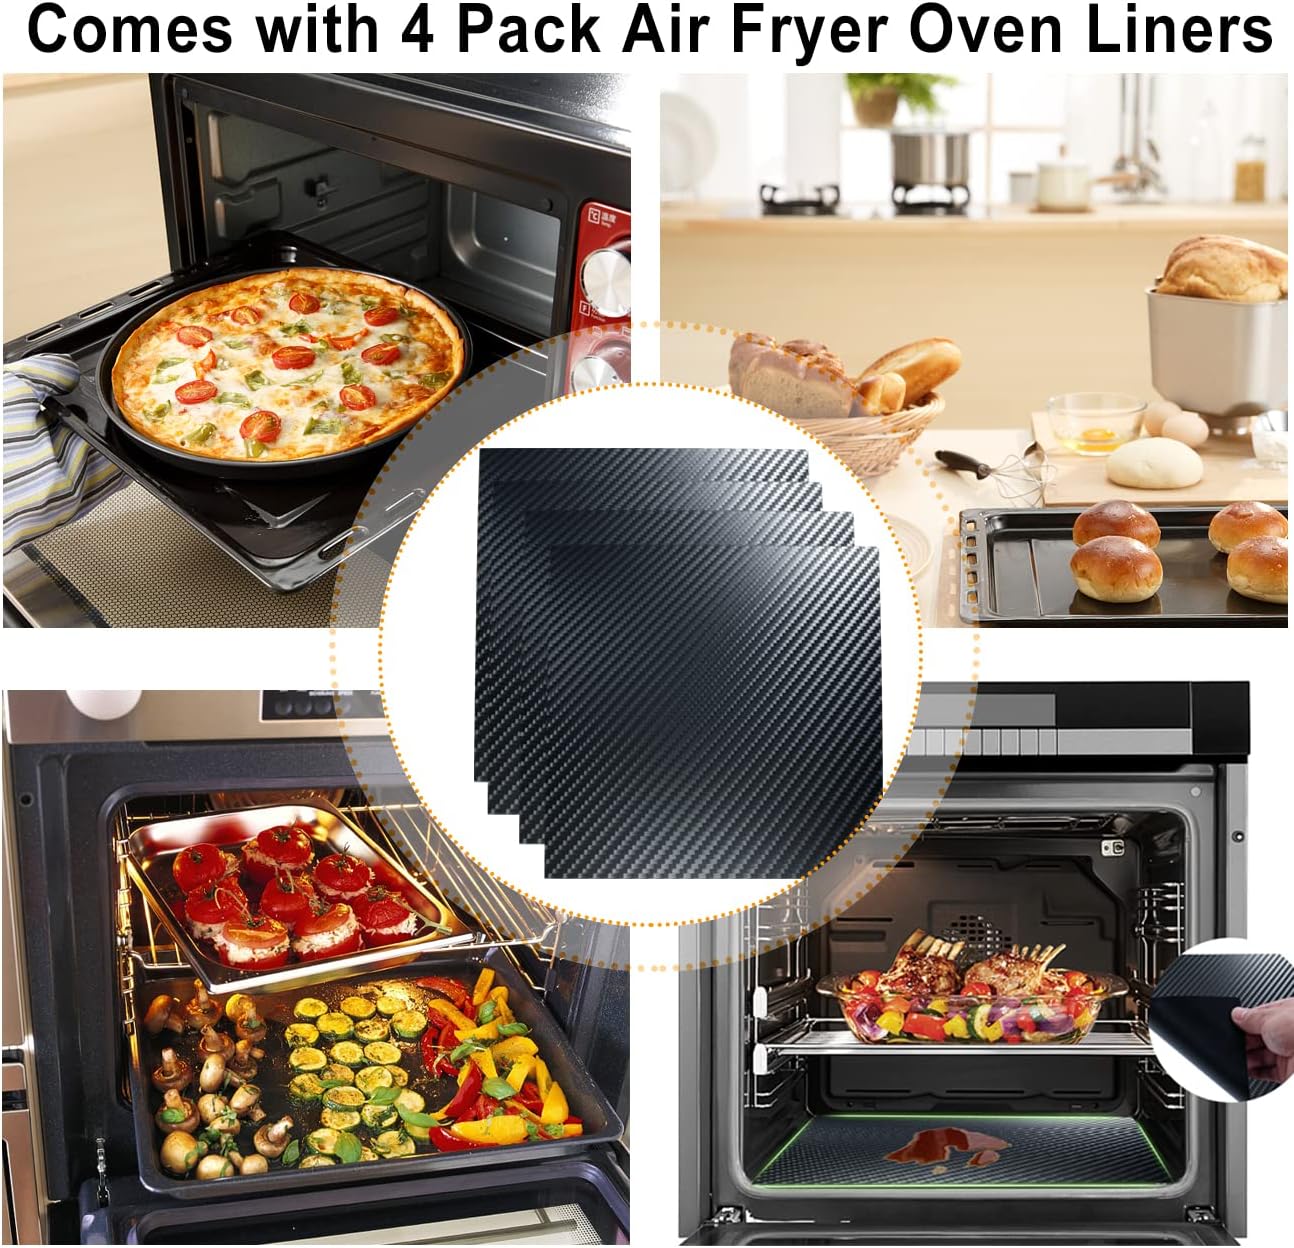 Air Fryer Oven Basket - Replacement Air Fry Basket for Ninja Foodi SP101  Air Fryer Oven, Stainless Steel Air Fryer Basket Accessories for Ninja  Foodi